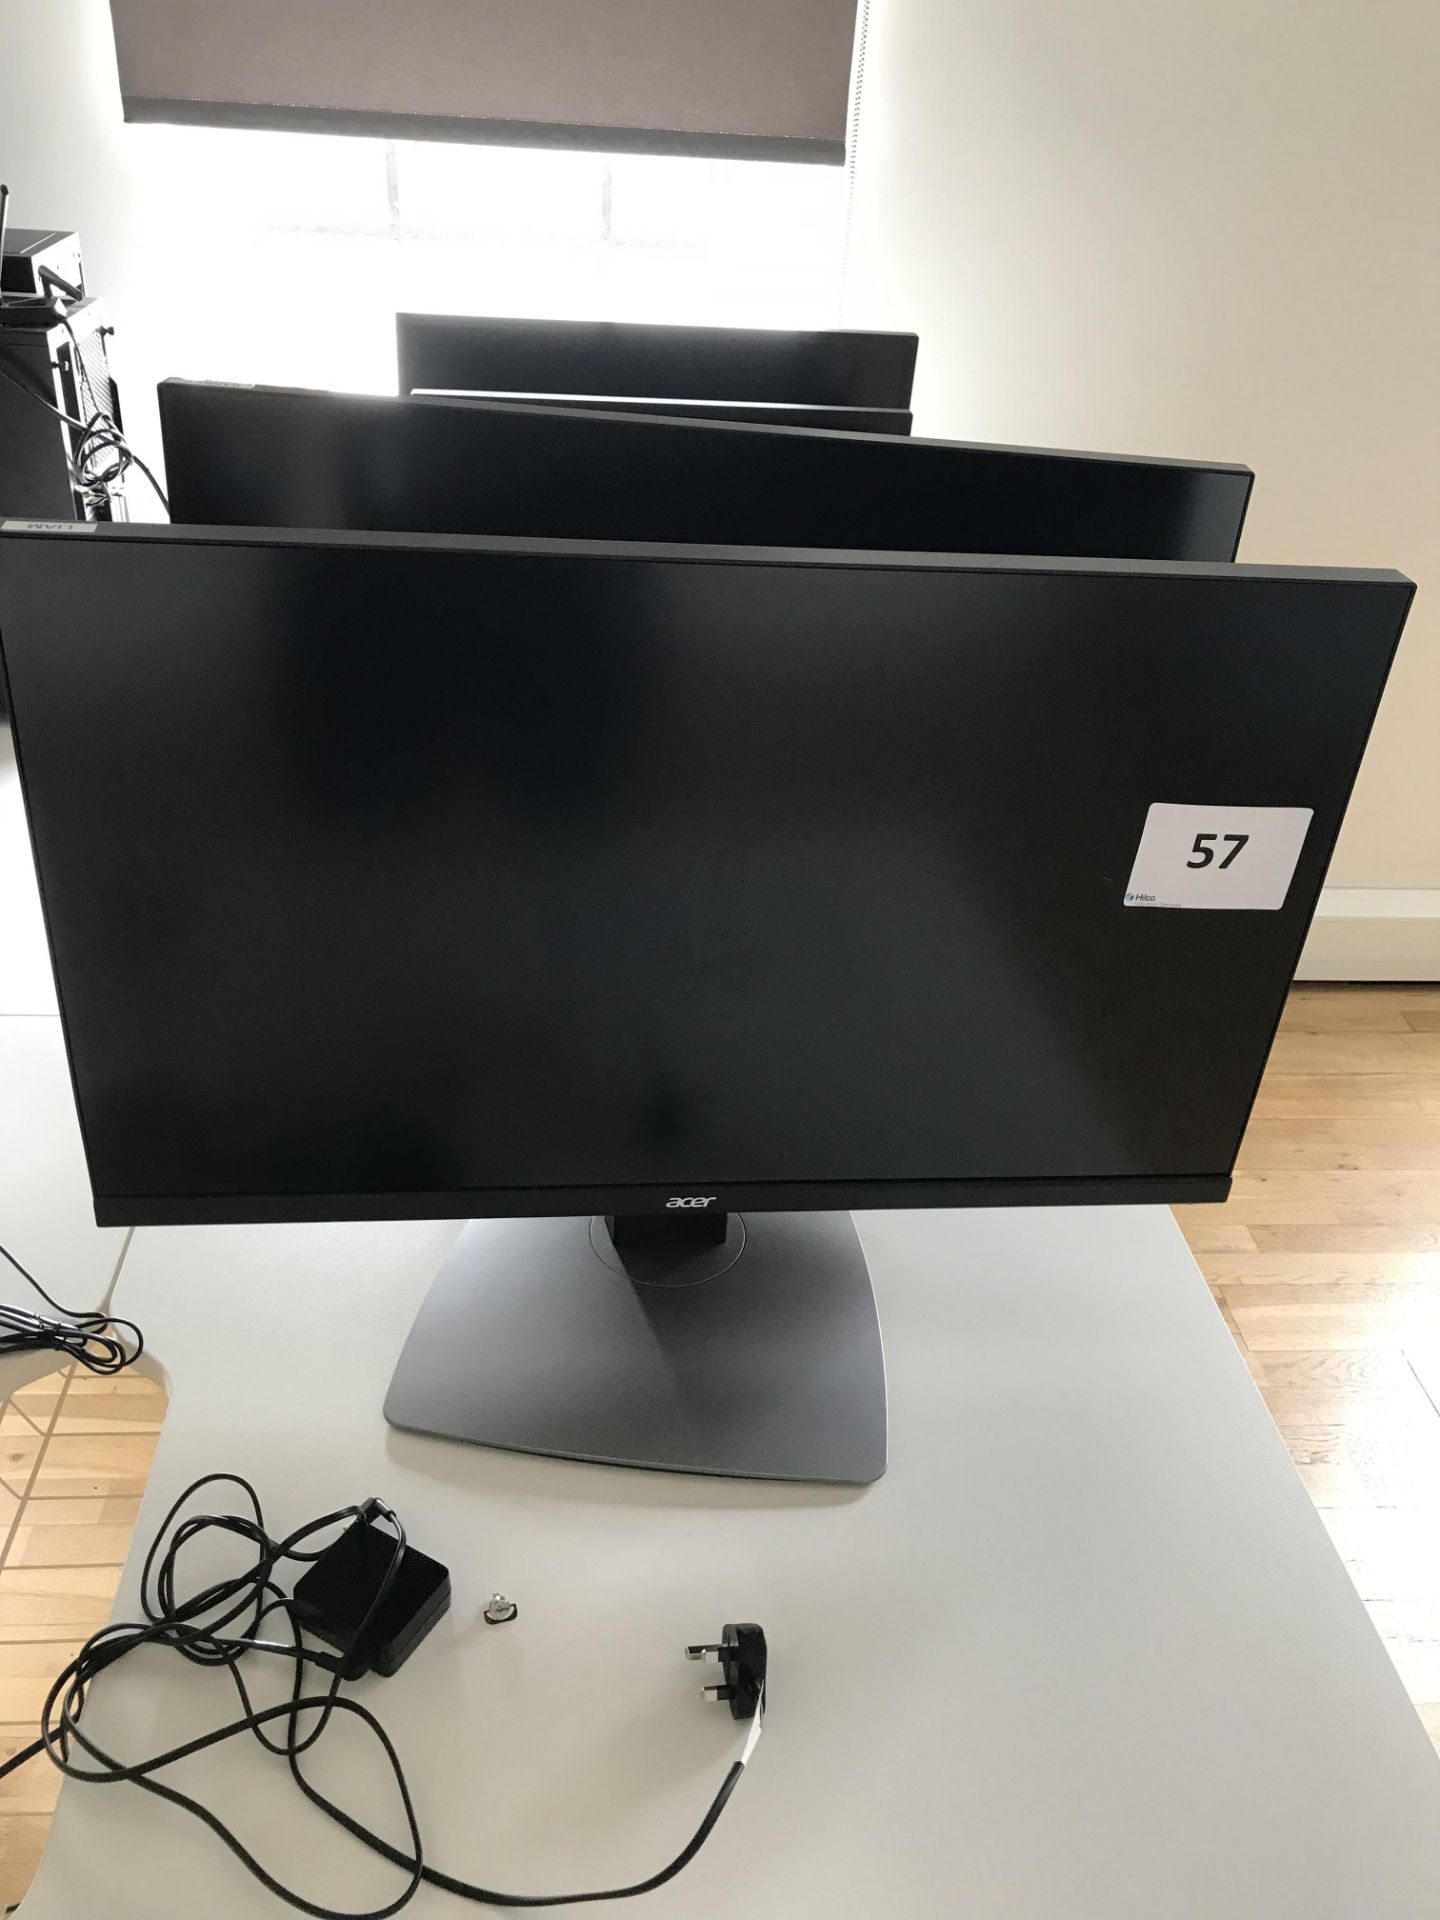 2, Acer BM320 32in Monitors As Lotted